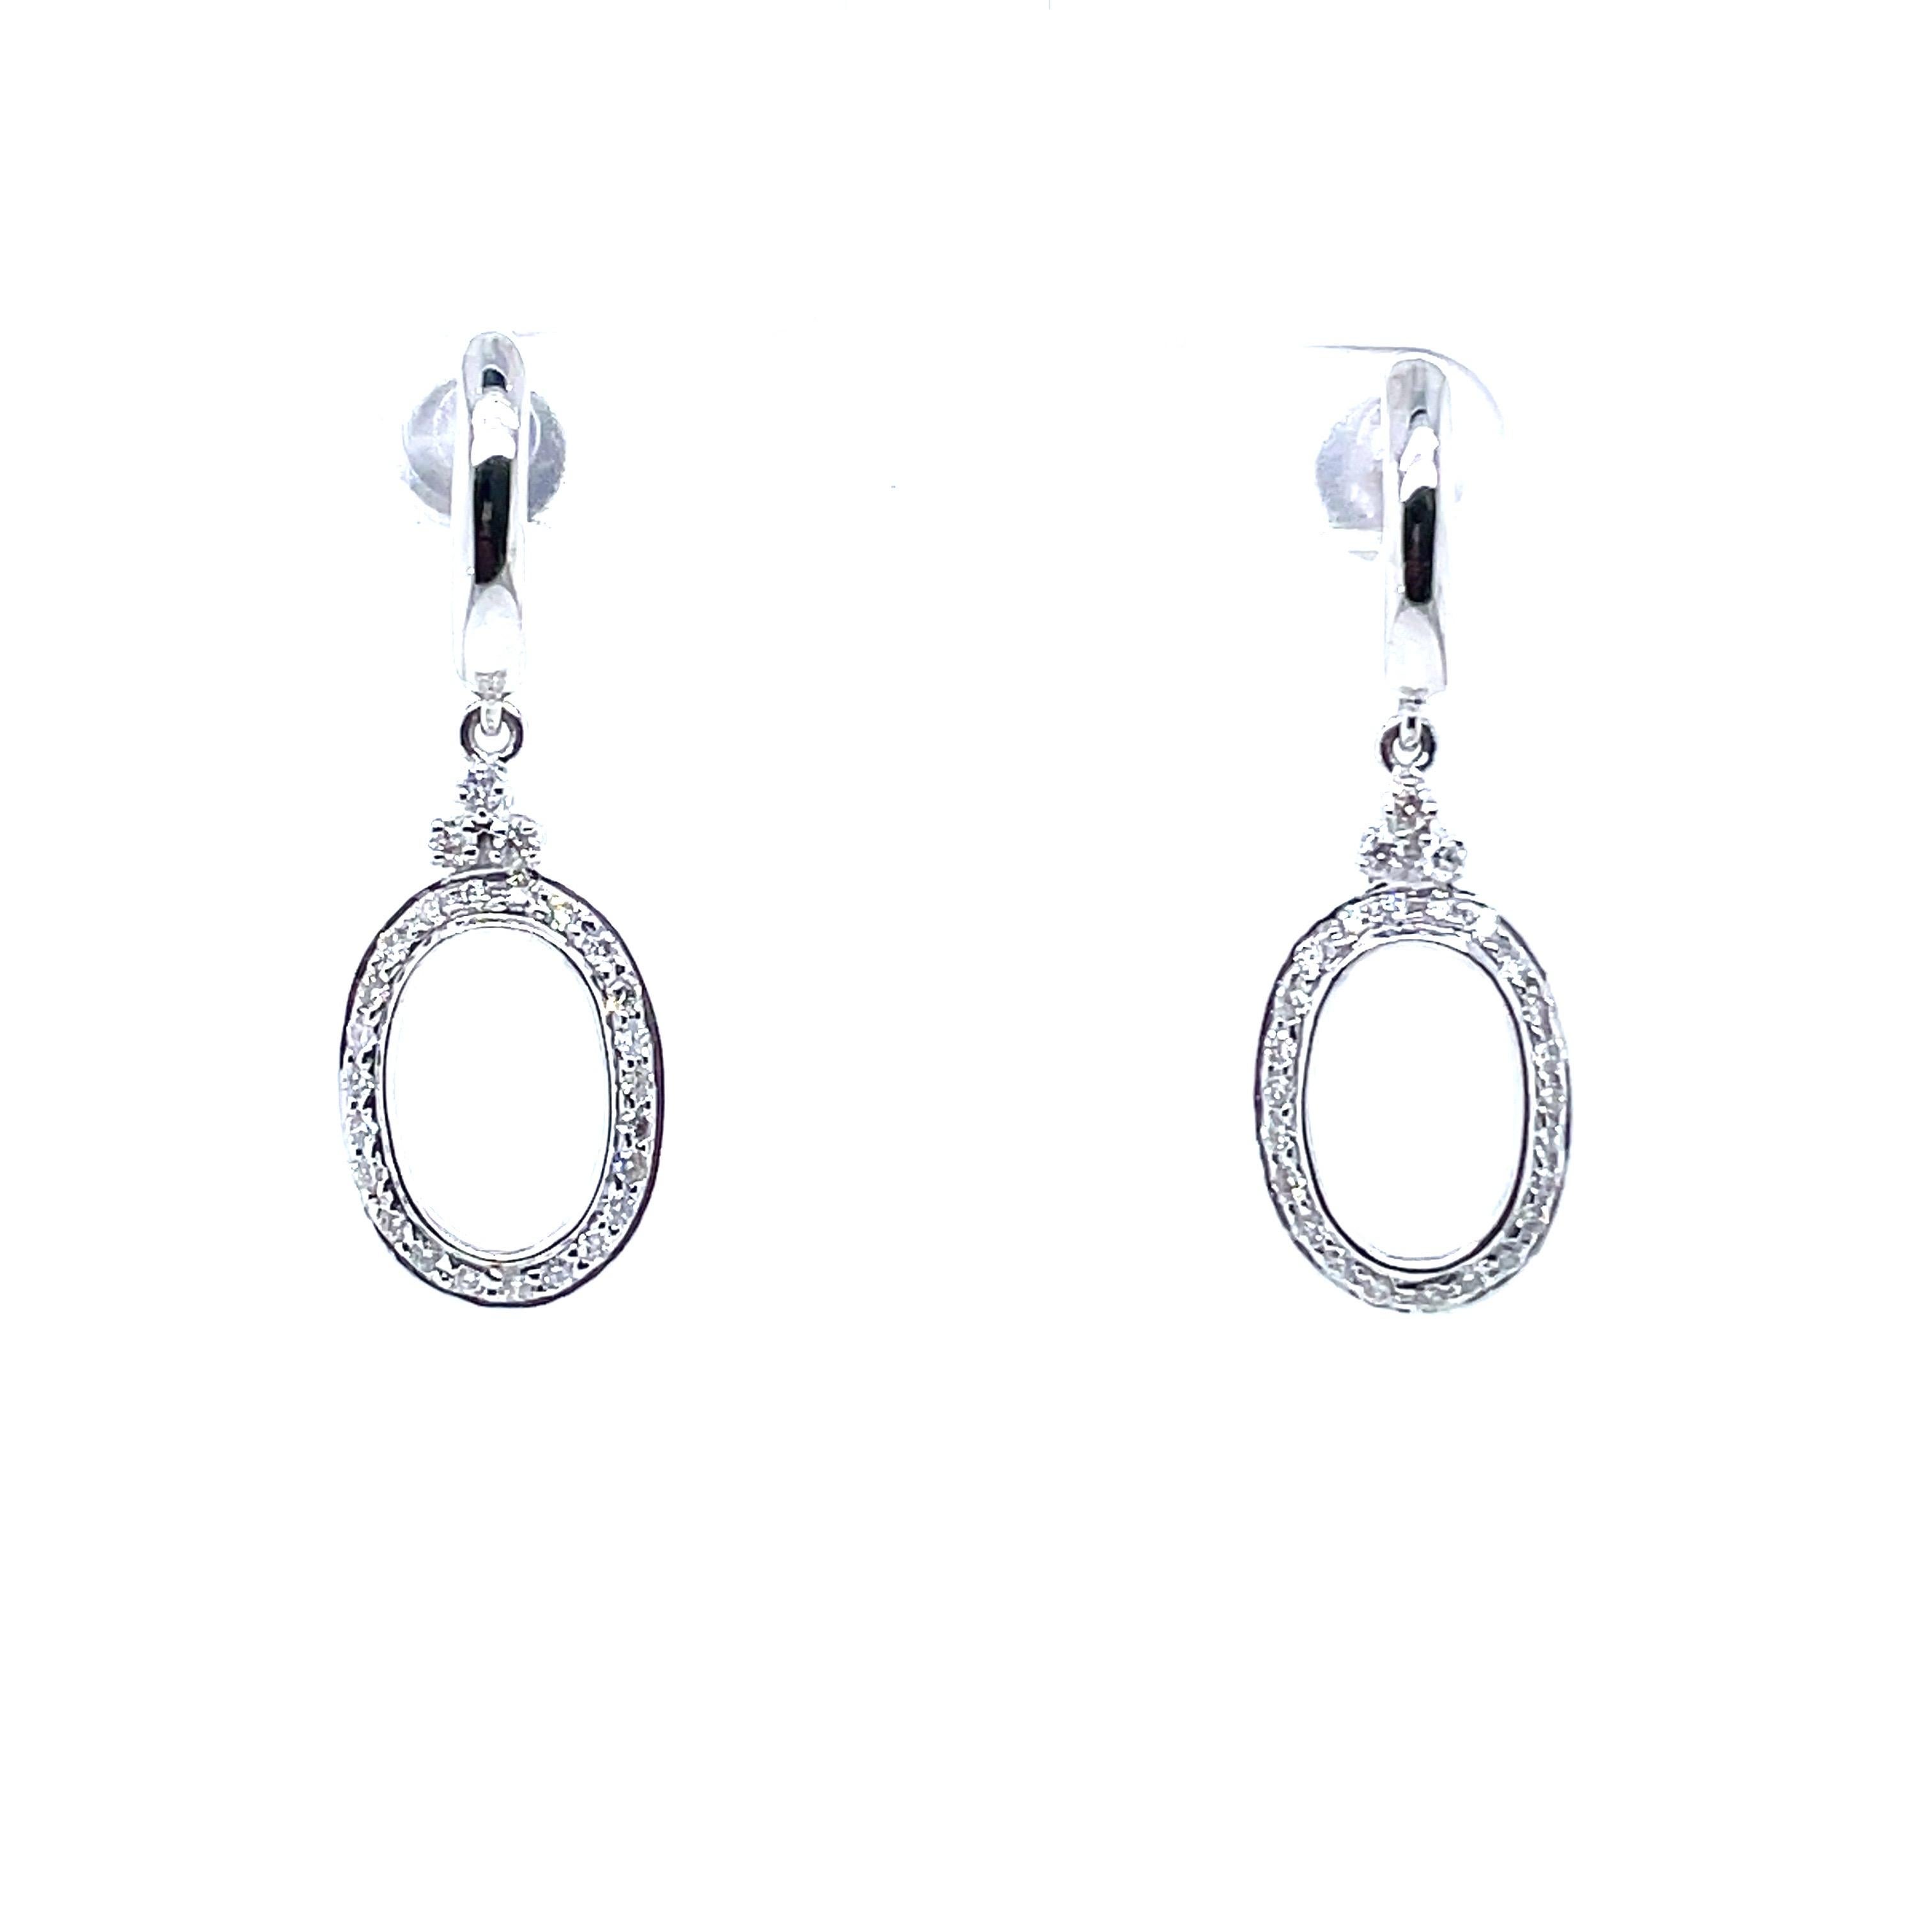 14k White Gold Round Diamond Oval Dangle Earrings

Crafted with precision, each earring features a captivating arrangement of diamonds, accentuating the oval silhouette with grace and brilliance.

Suspended by a secure push-back closure, these